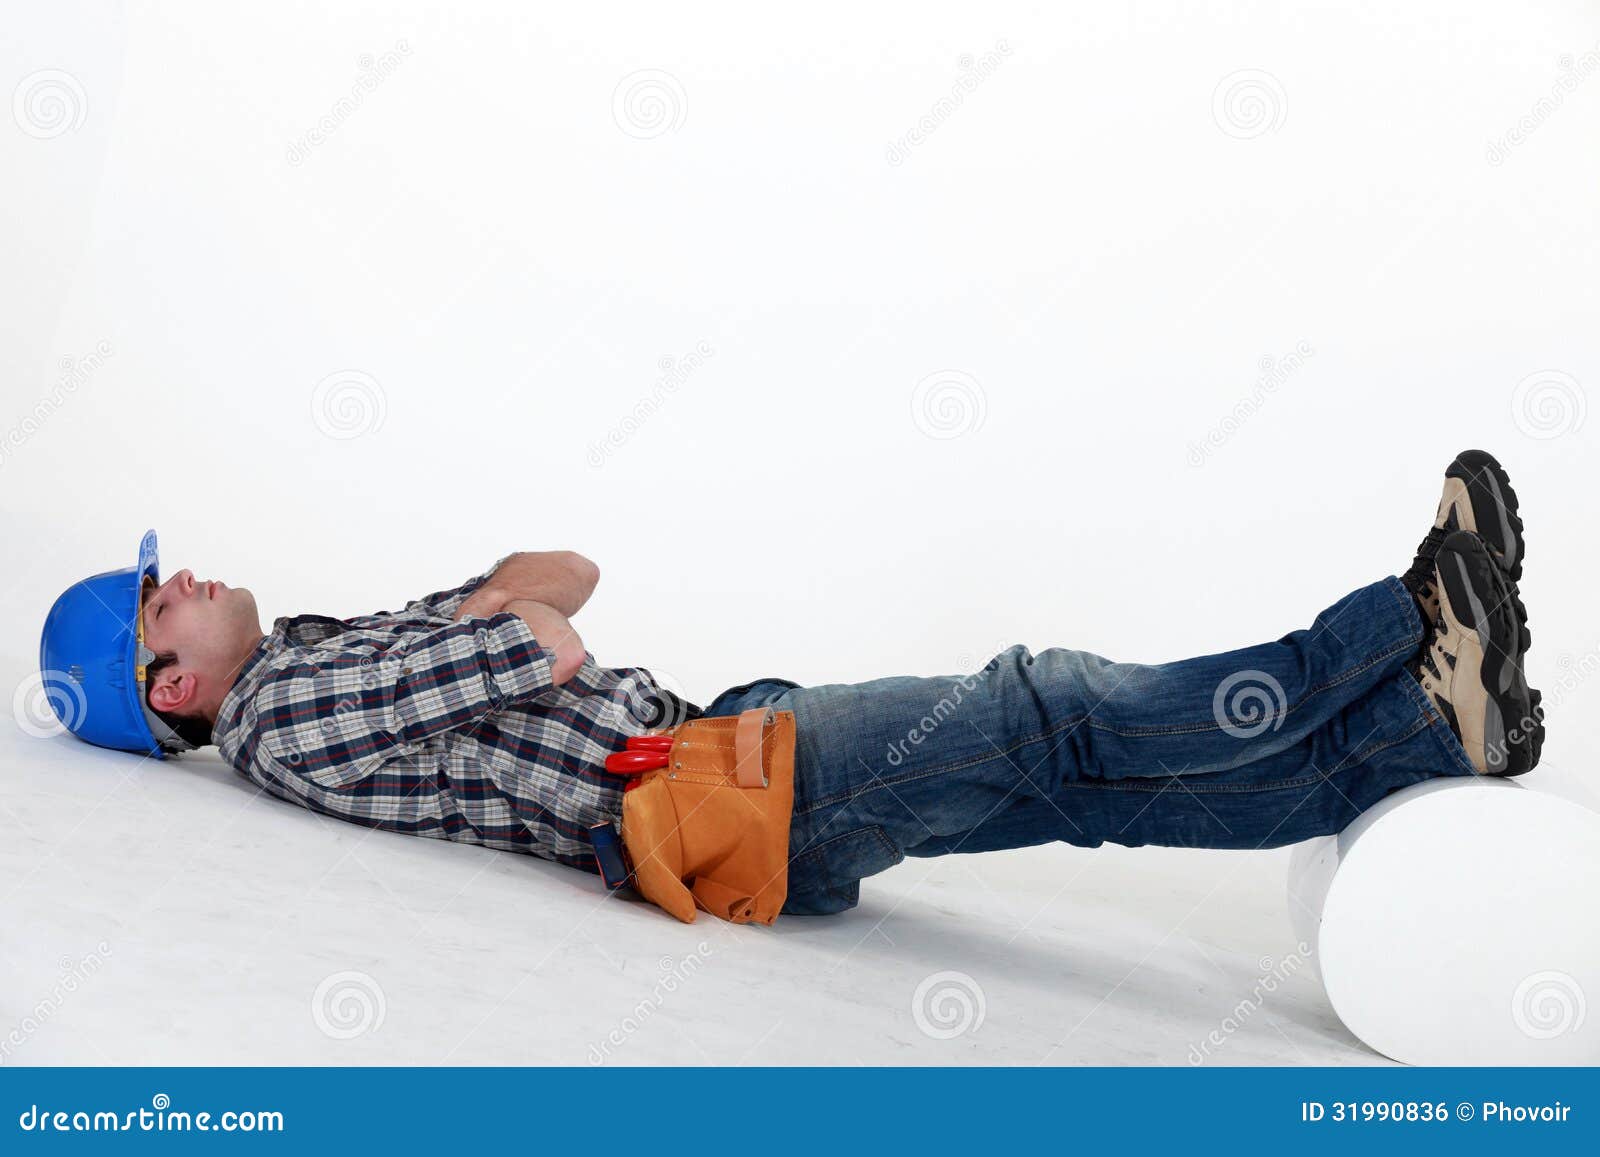 laborer laid on the floor